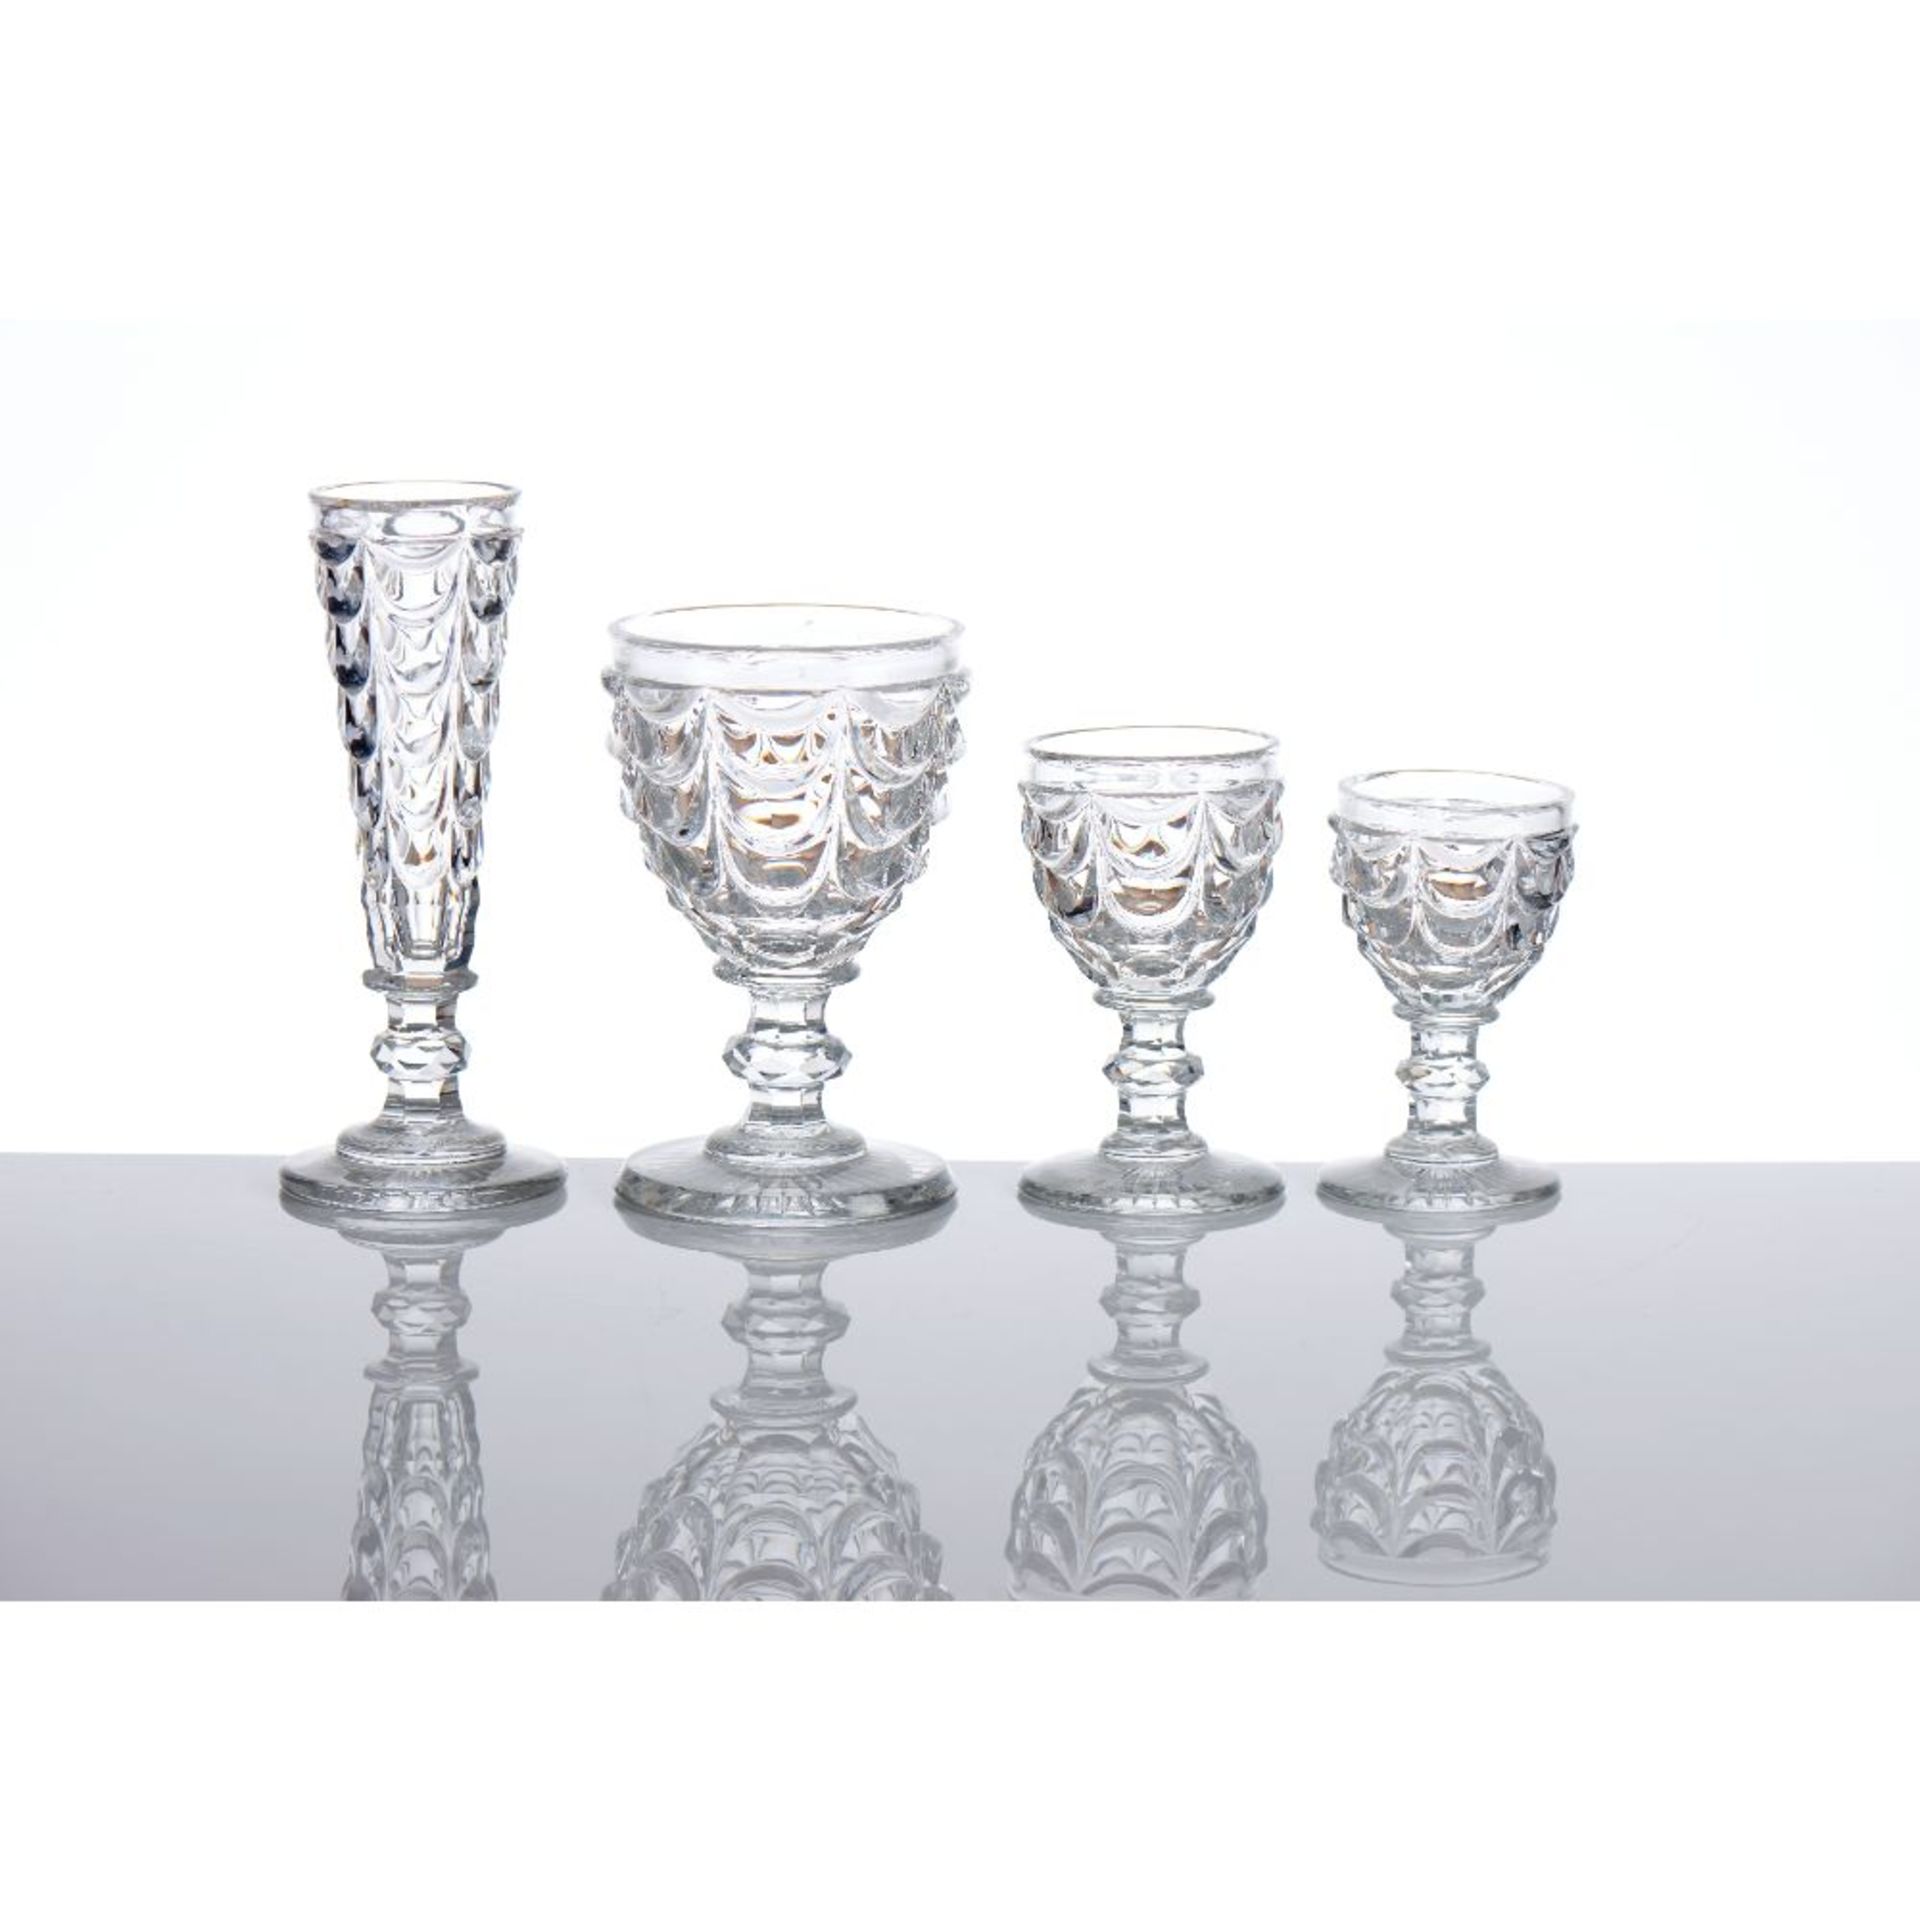 A set of Charles X drinking glasses for 10 - Image 2 of 2